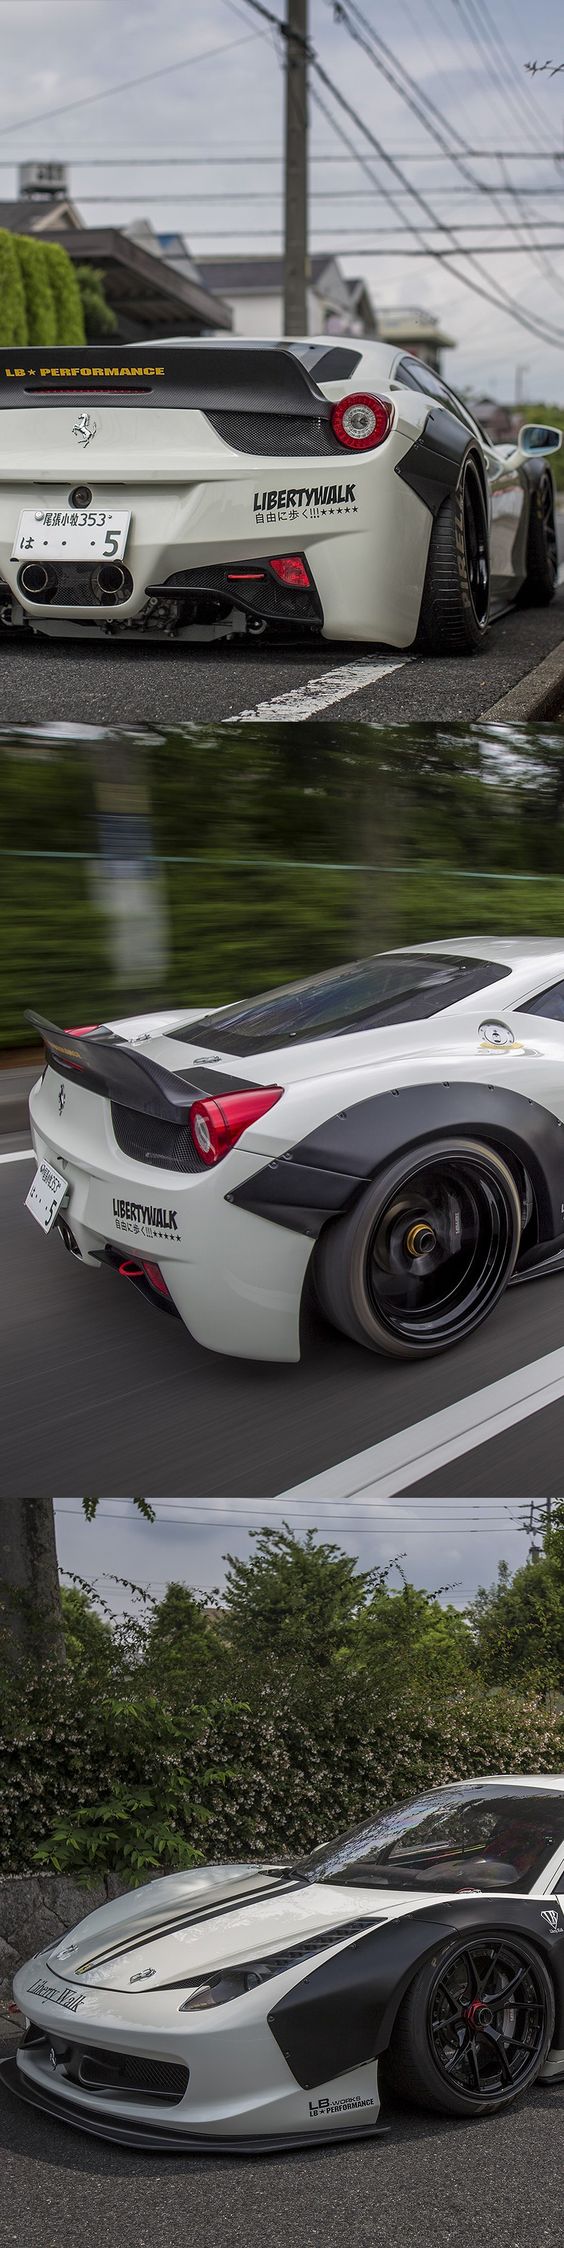 Awesome Cars ‘’ Liberty Walk Ferrari 458 Italia ‘’ Cars Design And Concepts, Best Of New Cars